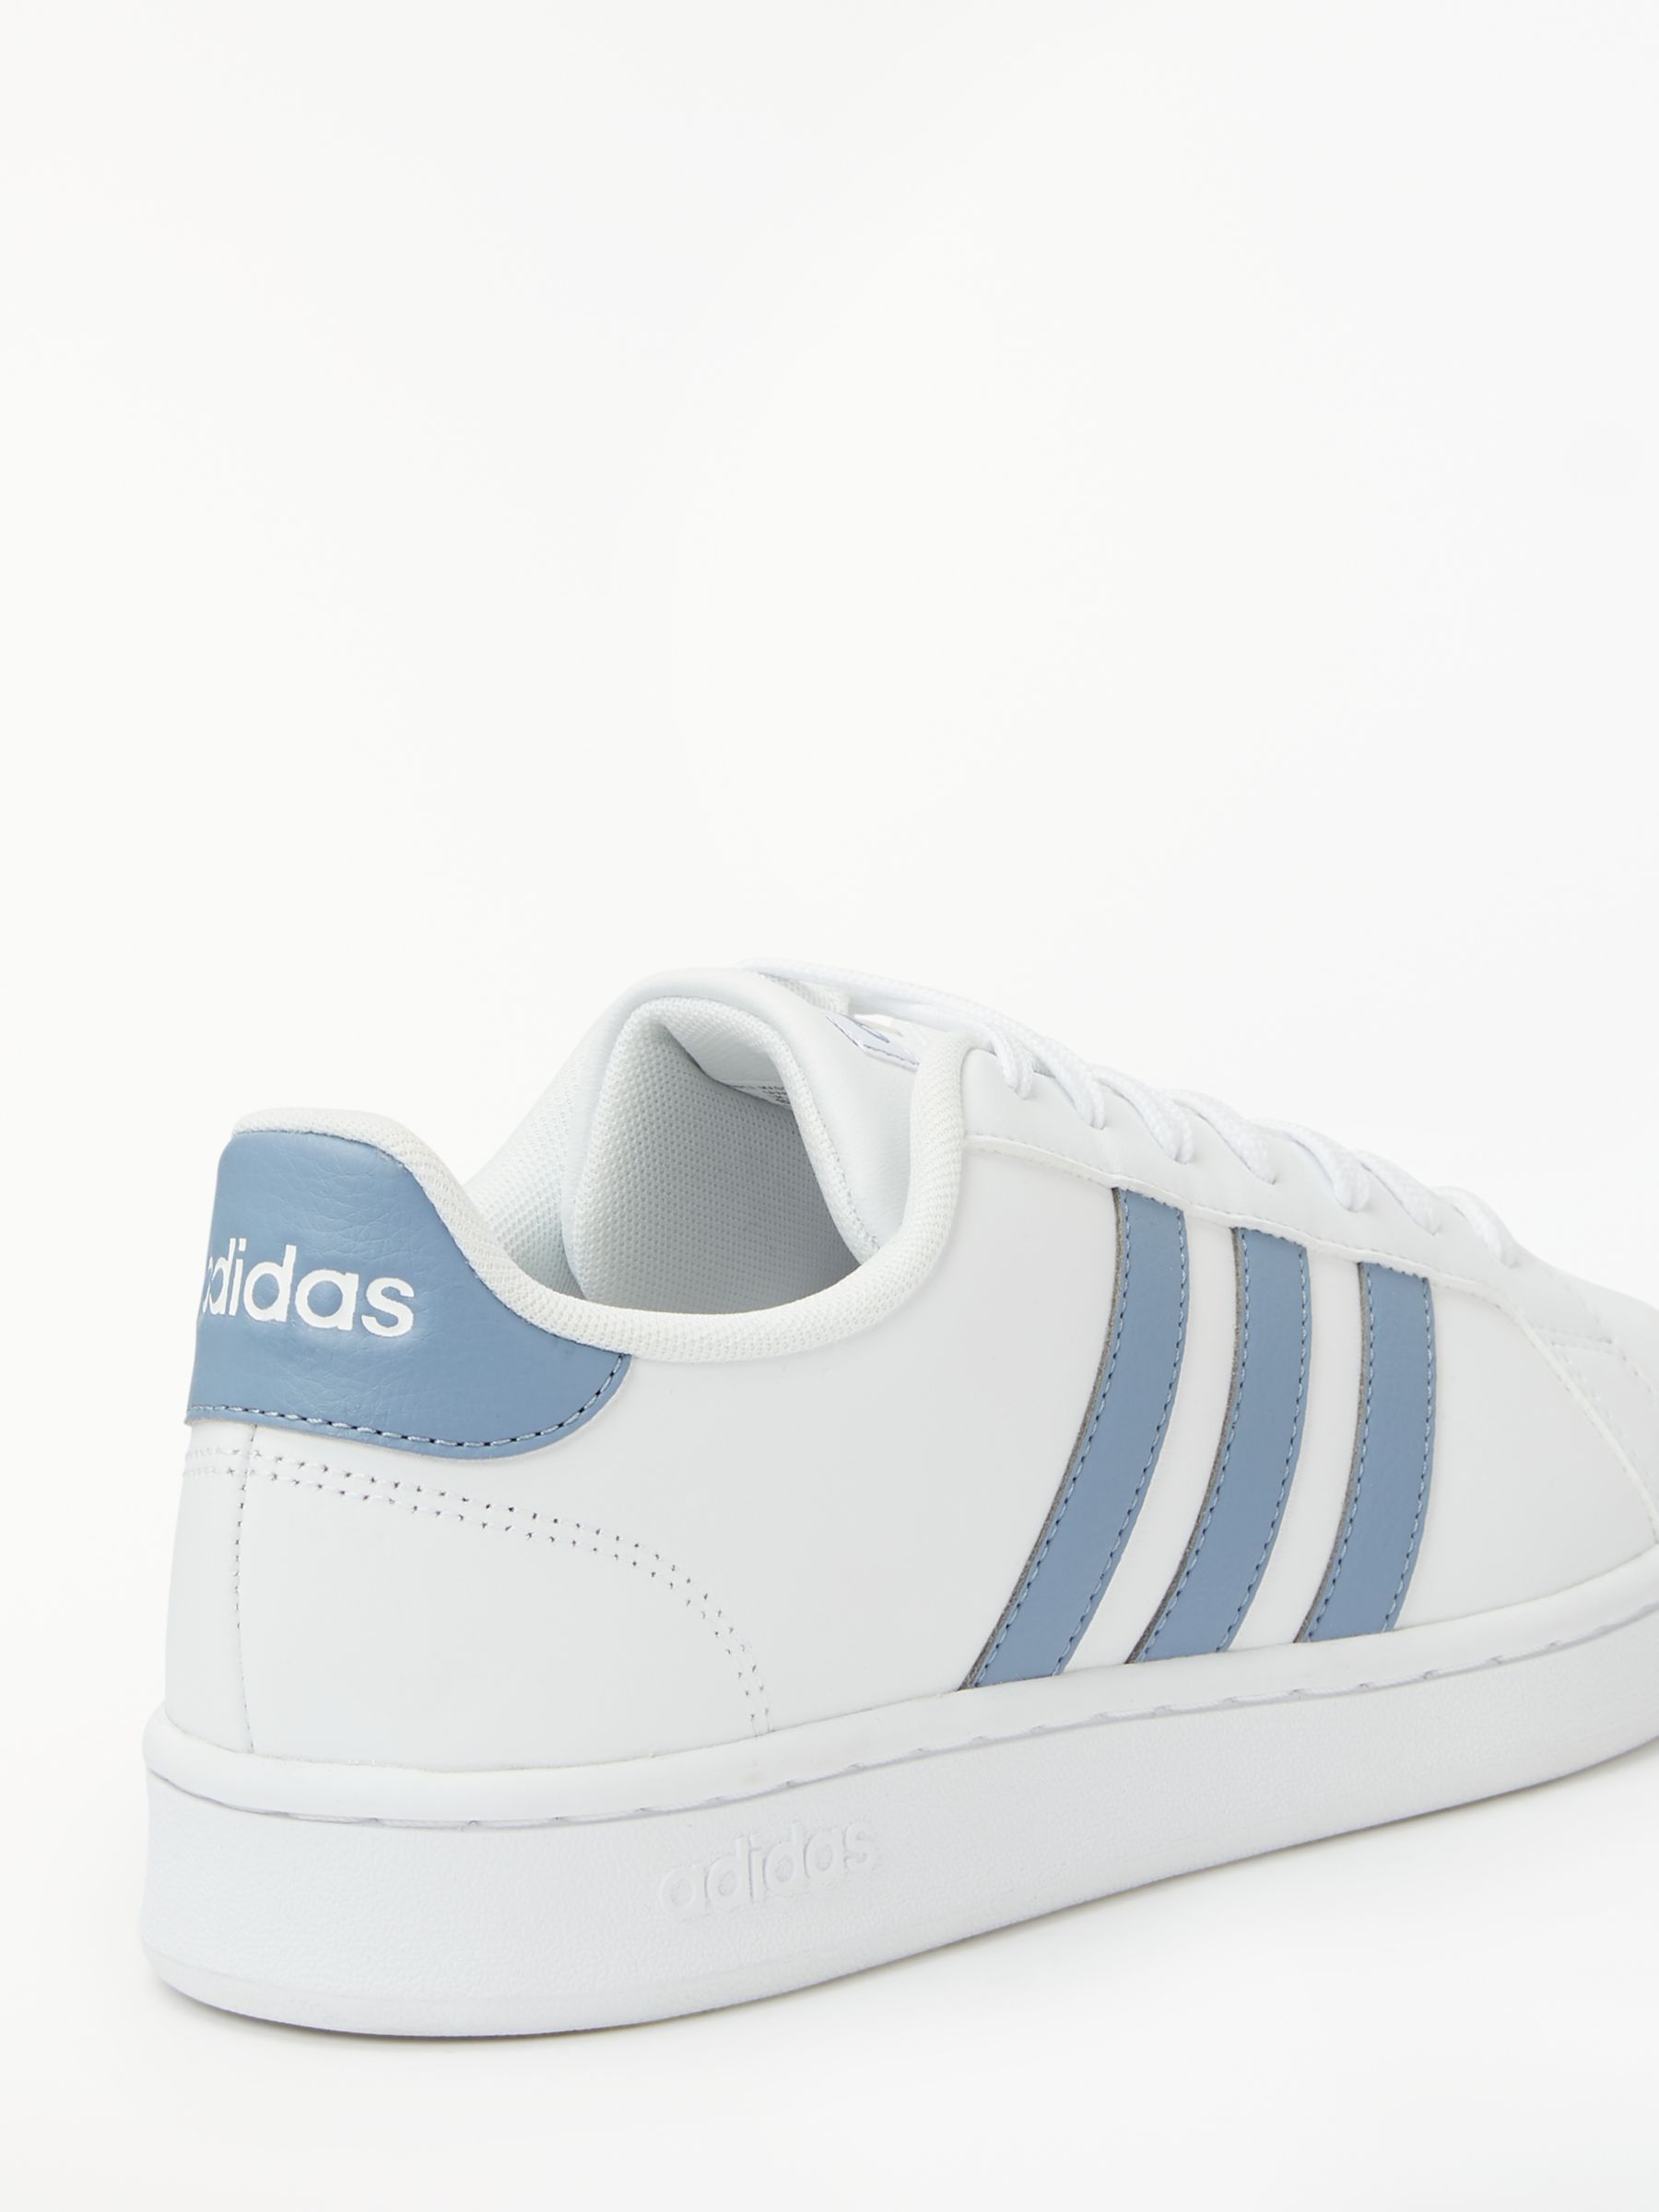 adidas Grand Court Men's Trainers, FTWR White/Raw Grey